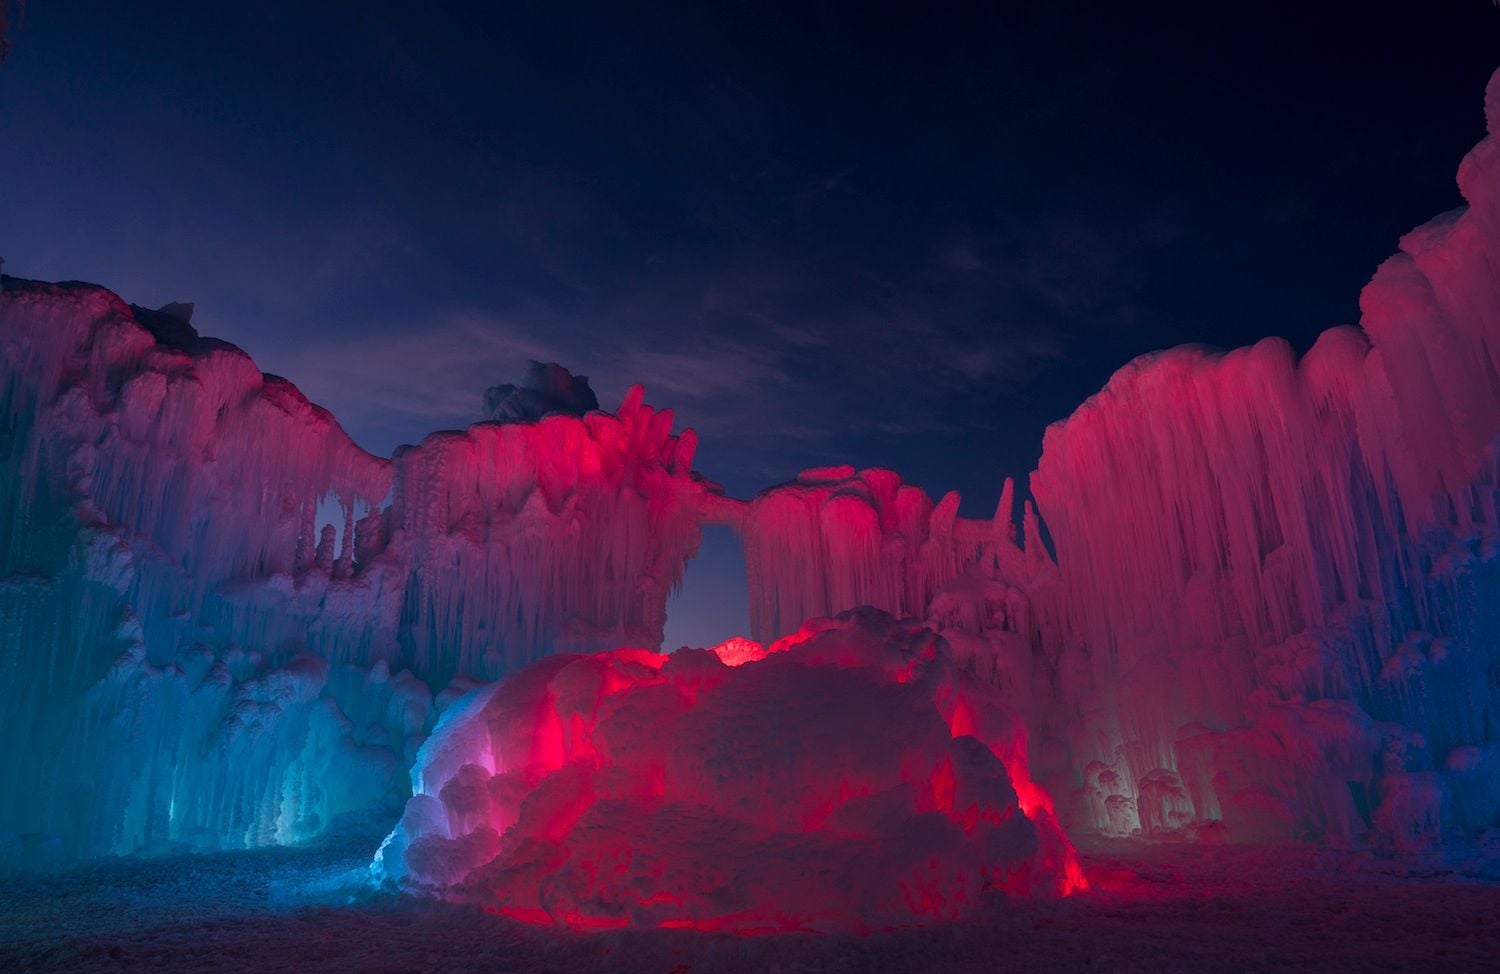 One of Brent Christensen's ice castles glows an ominous crimson shade in the cold winter evening.